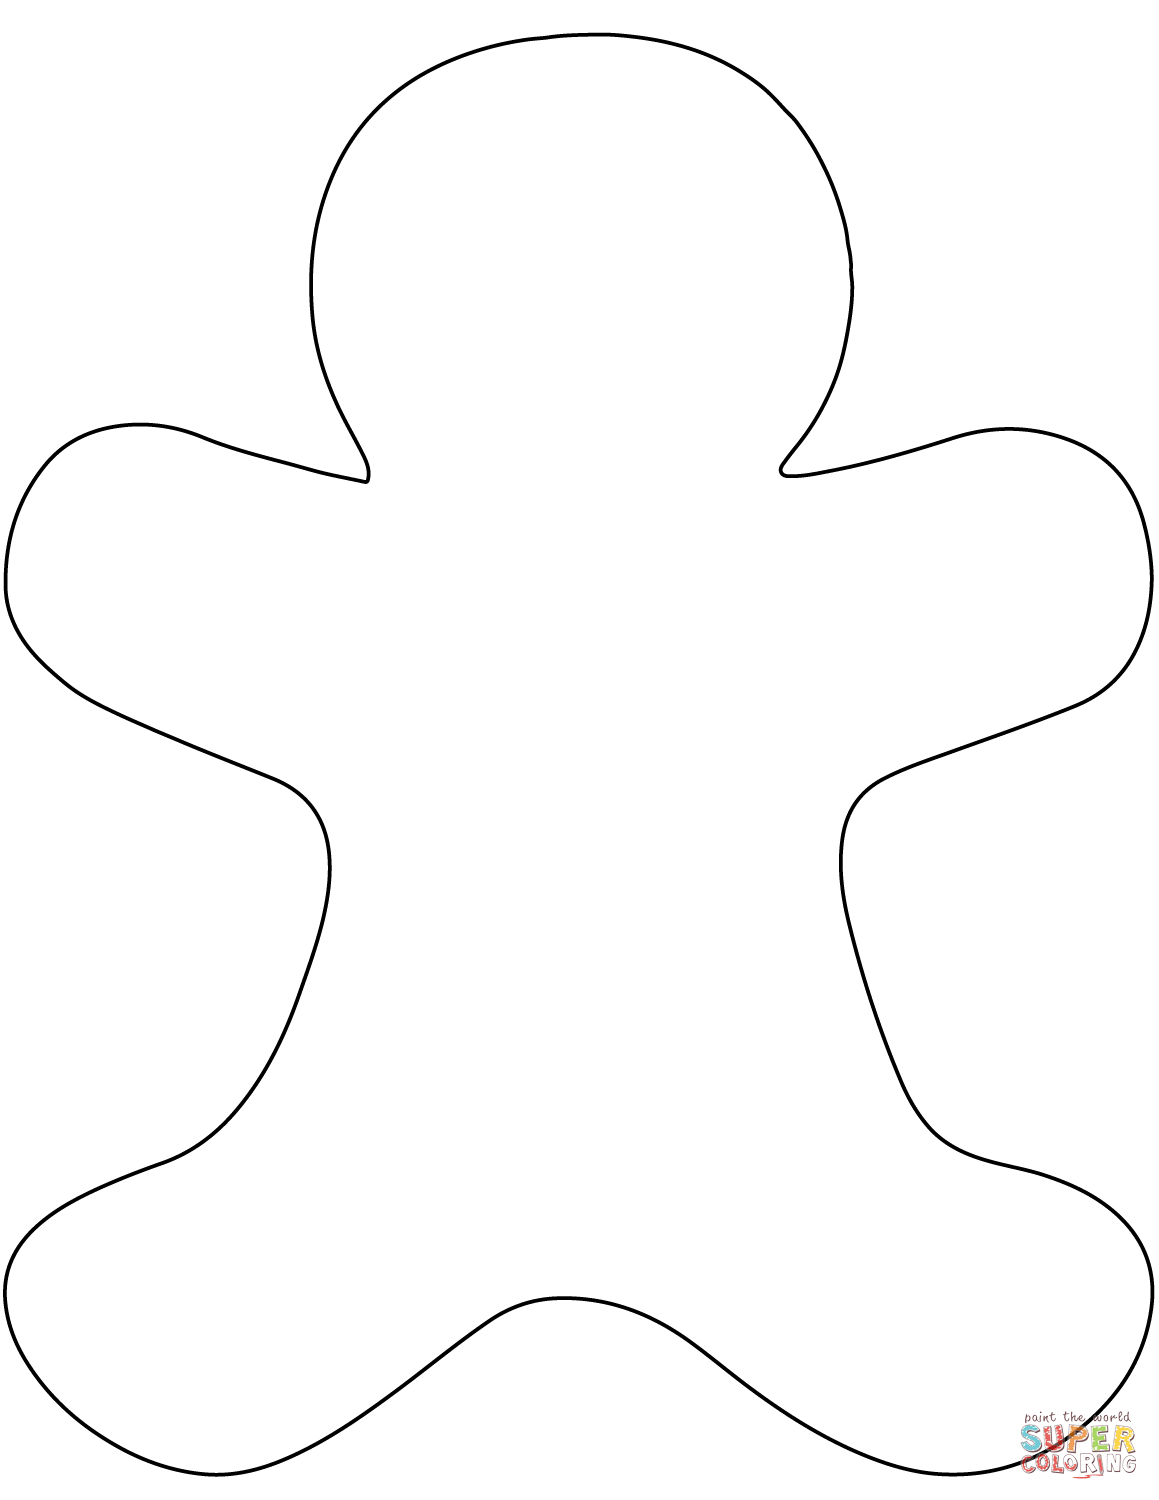 Blank Gingerbread Man Coloring Page | Free Printable Coloring Pages - Gingerbread Template Free Printable